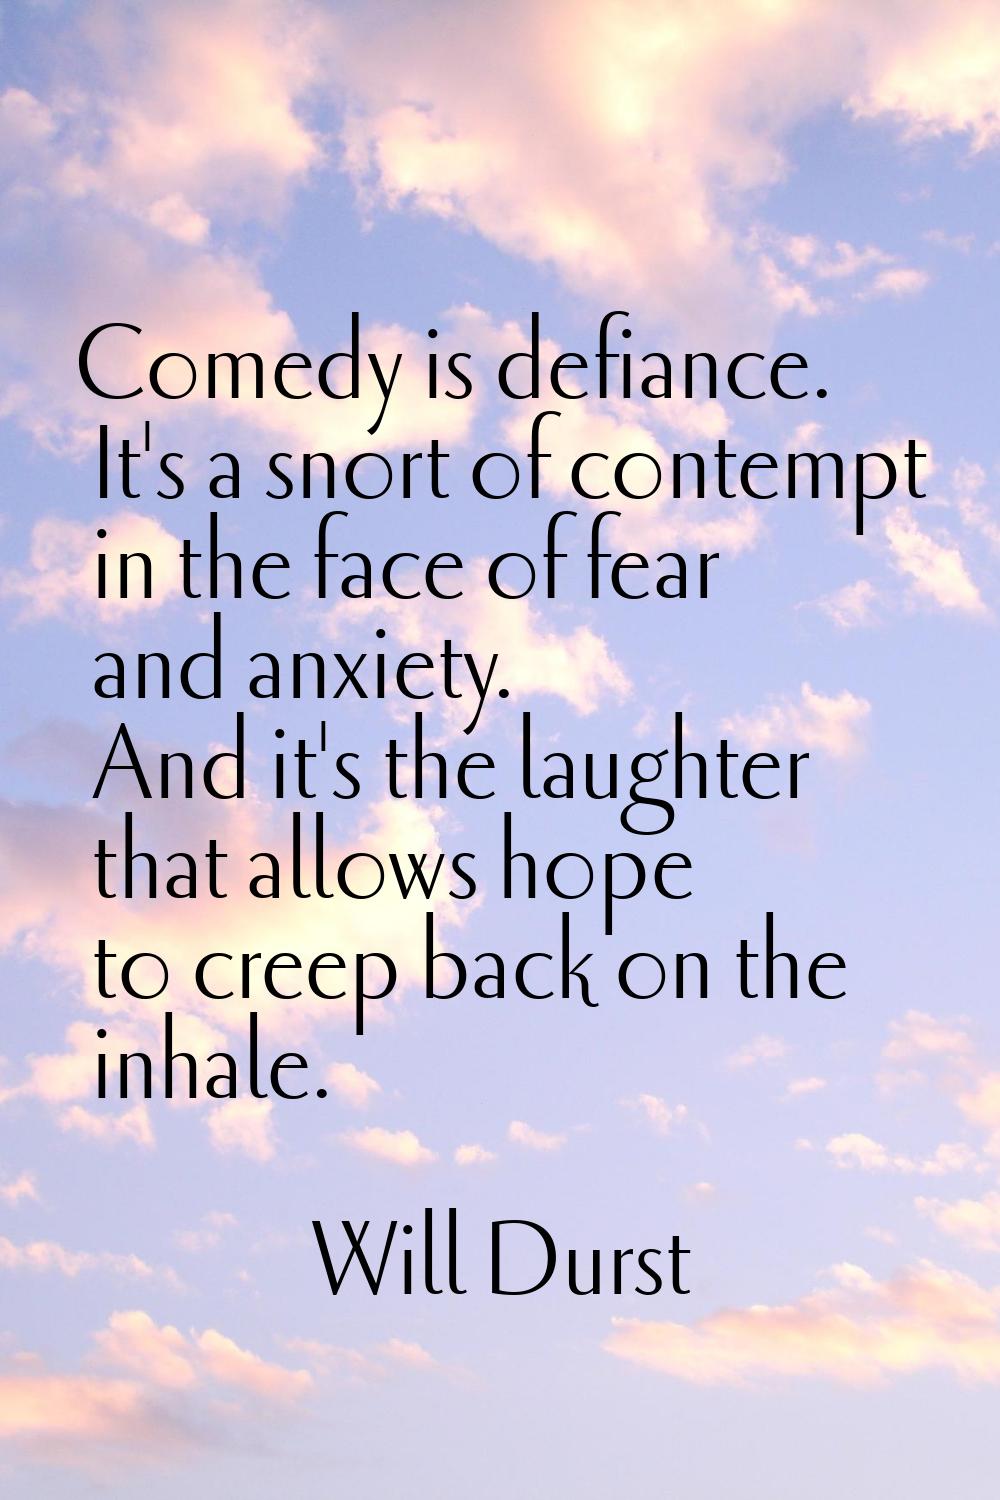 Comedy is defiance. It's a snort of contempt in the face of fear and anxiety. And it's the laughter